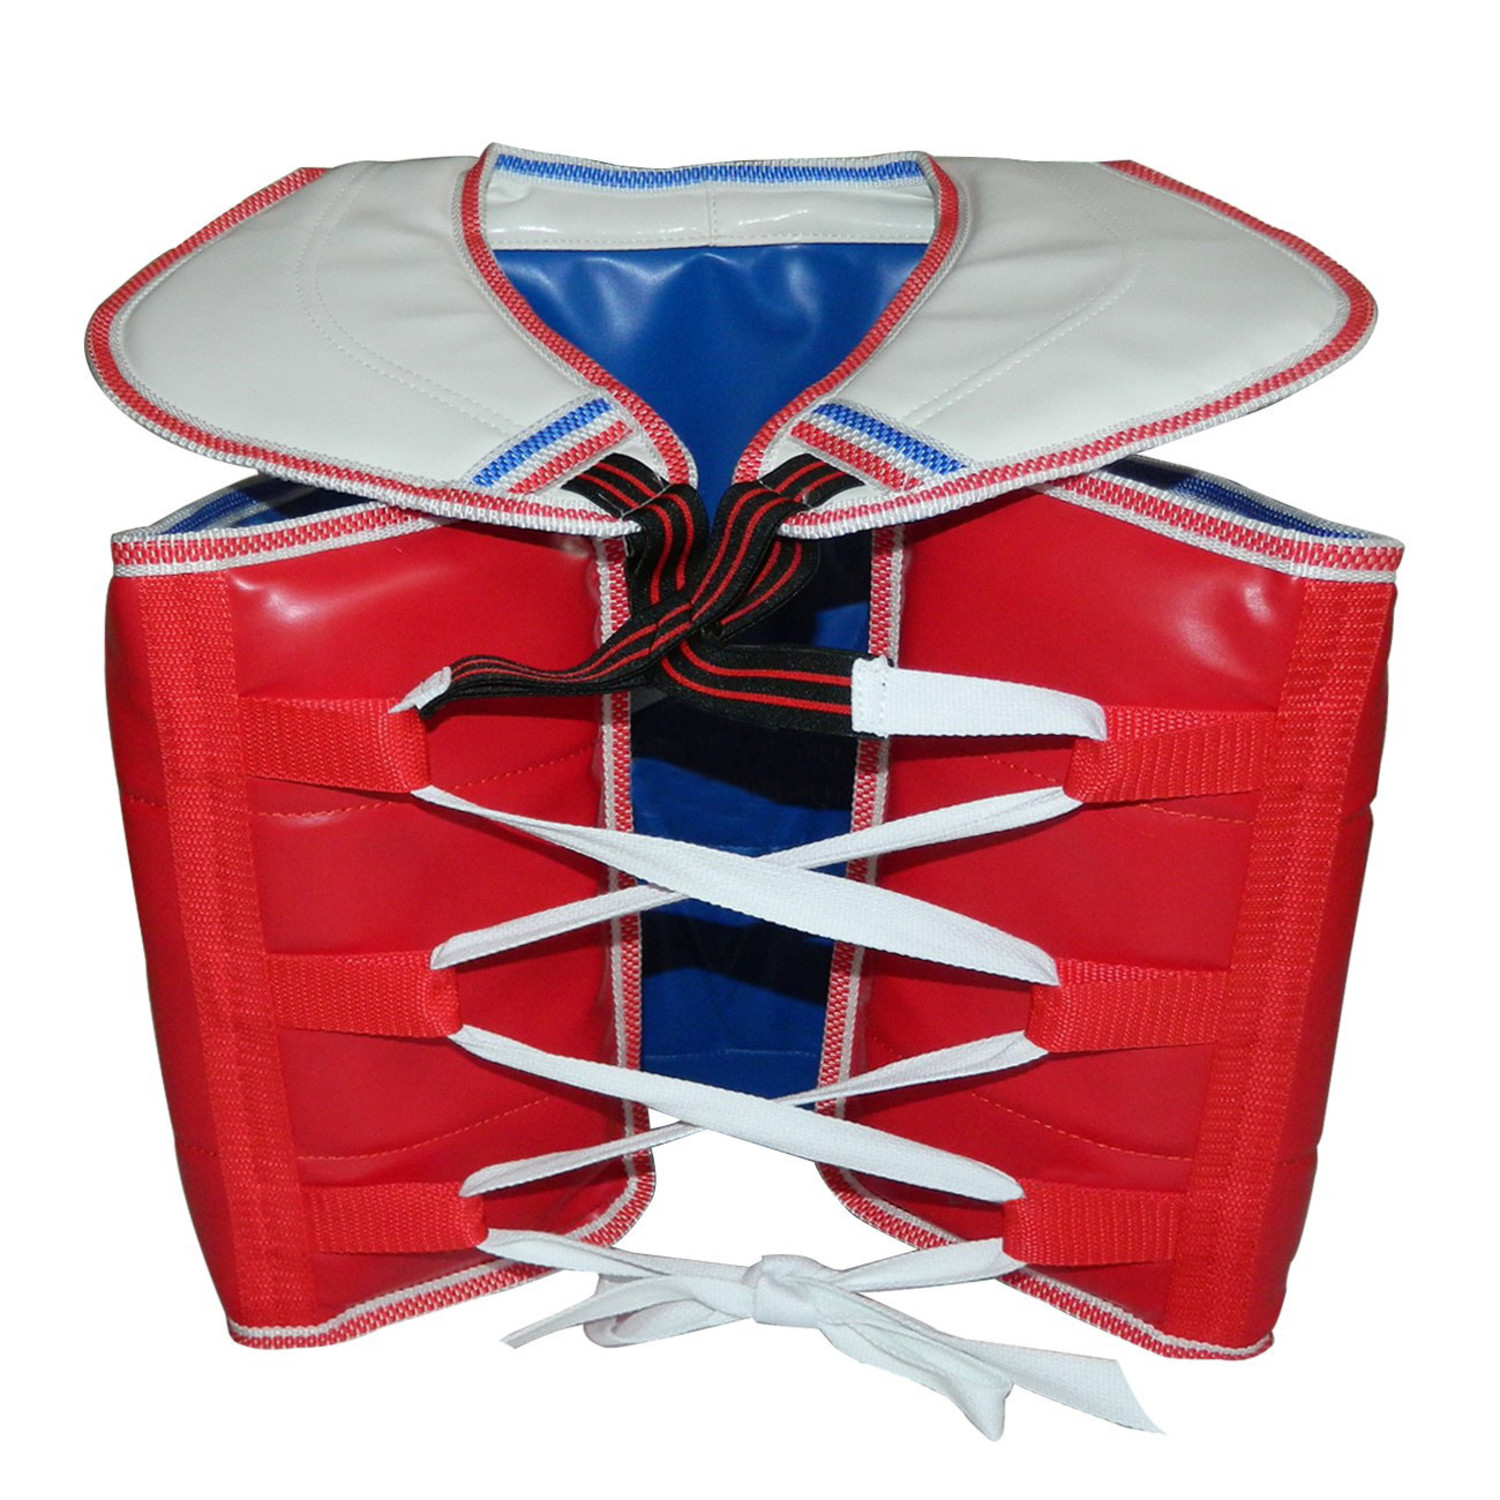 WT Taekwondo Chest Protector for WT Competition Sparring - Enso Martial  Arts Shop Bristol